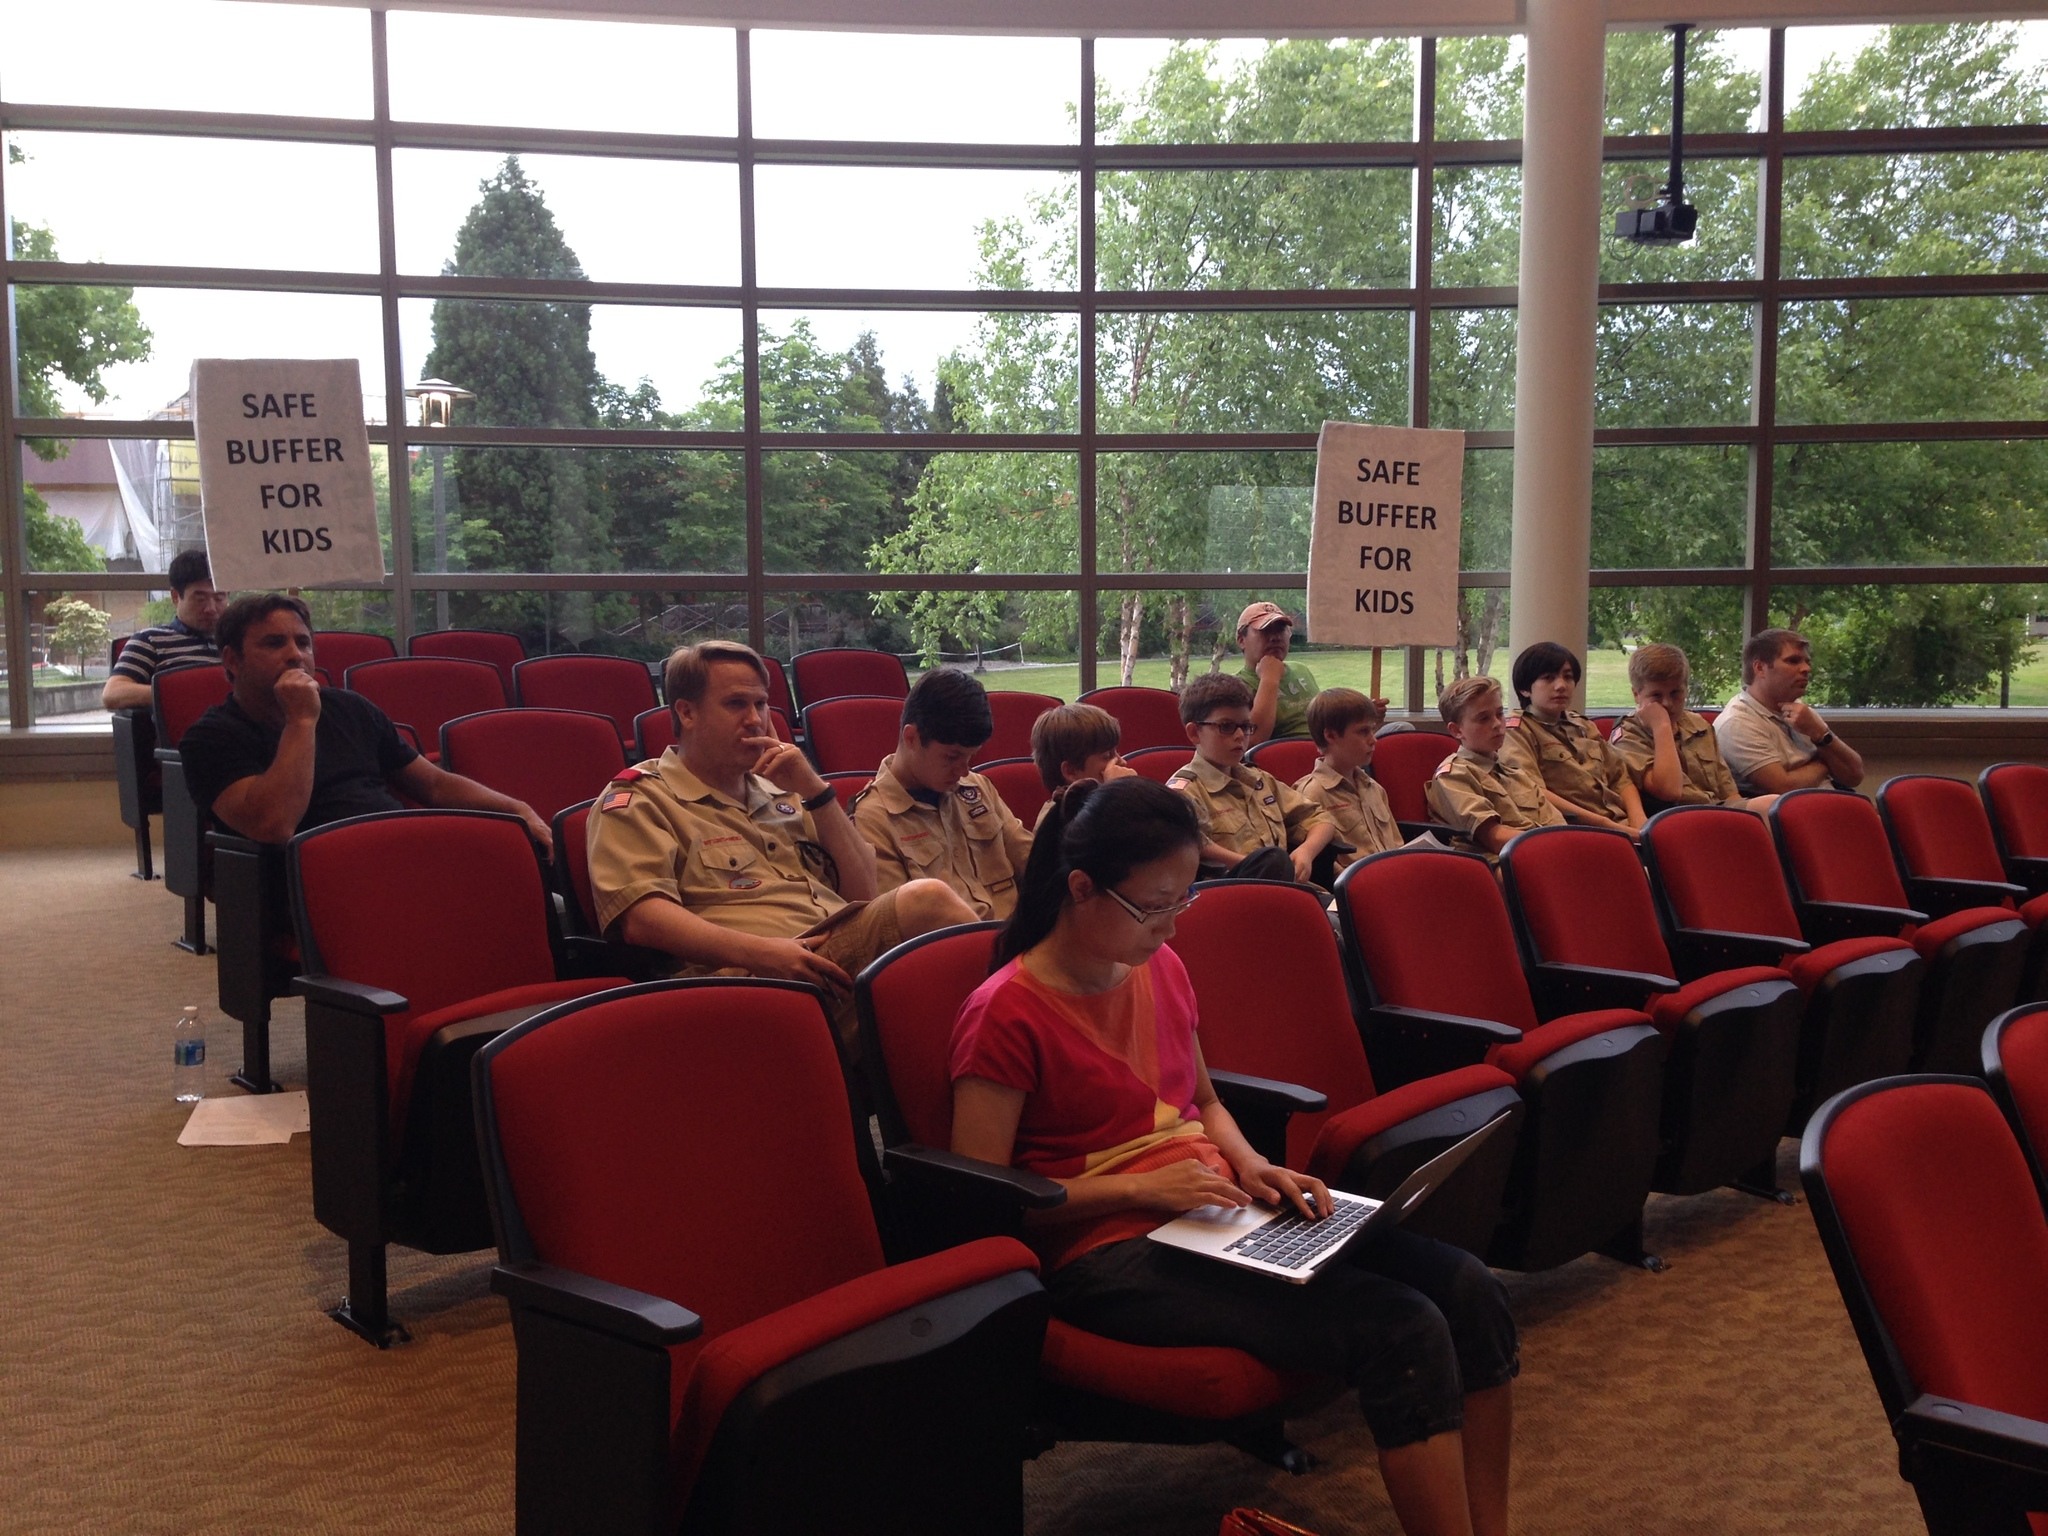 People hold up signs at Tuesday’s City Council meeting to protest allowing marijuana retail stores in Redmond. Samantha Pak